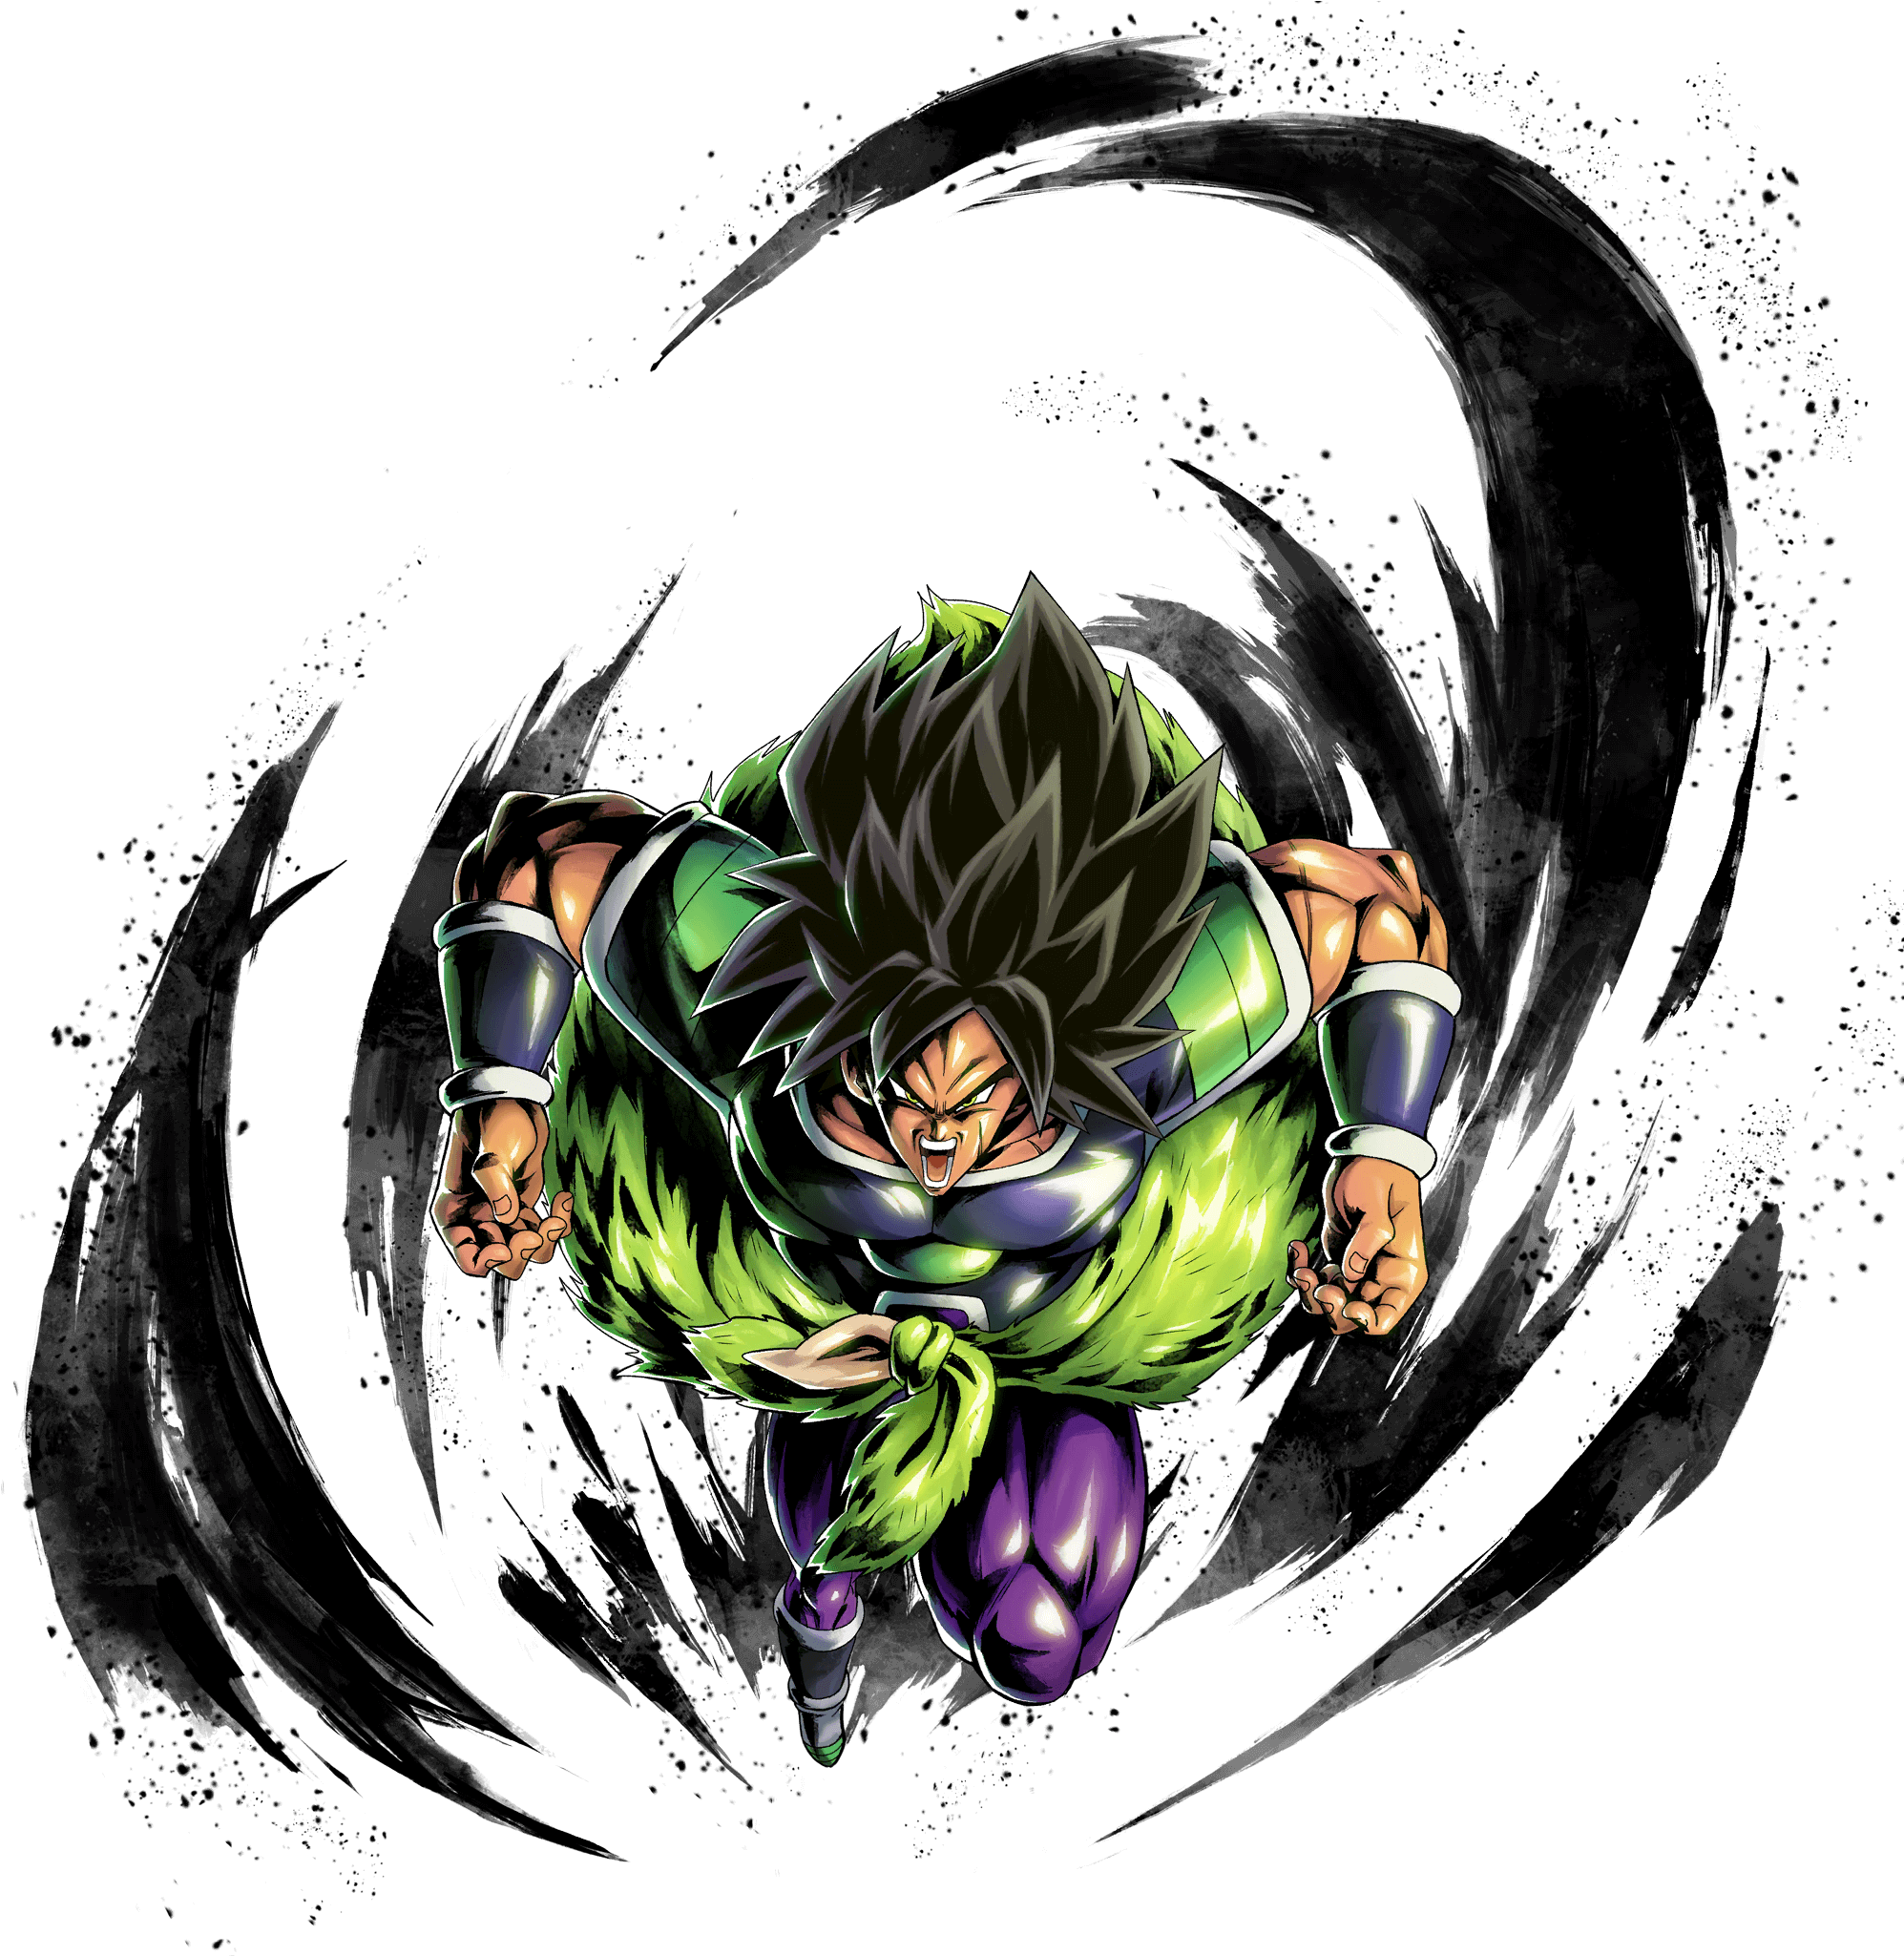 A Cartoon Character In A Green And Purple Outfit